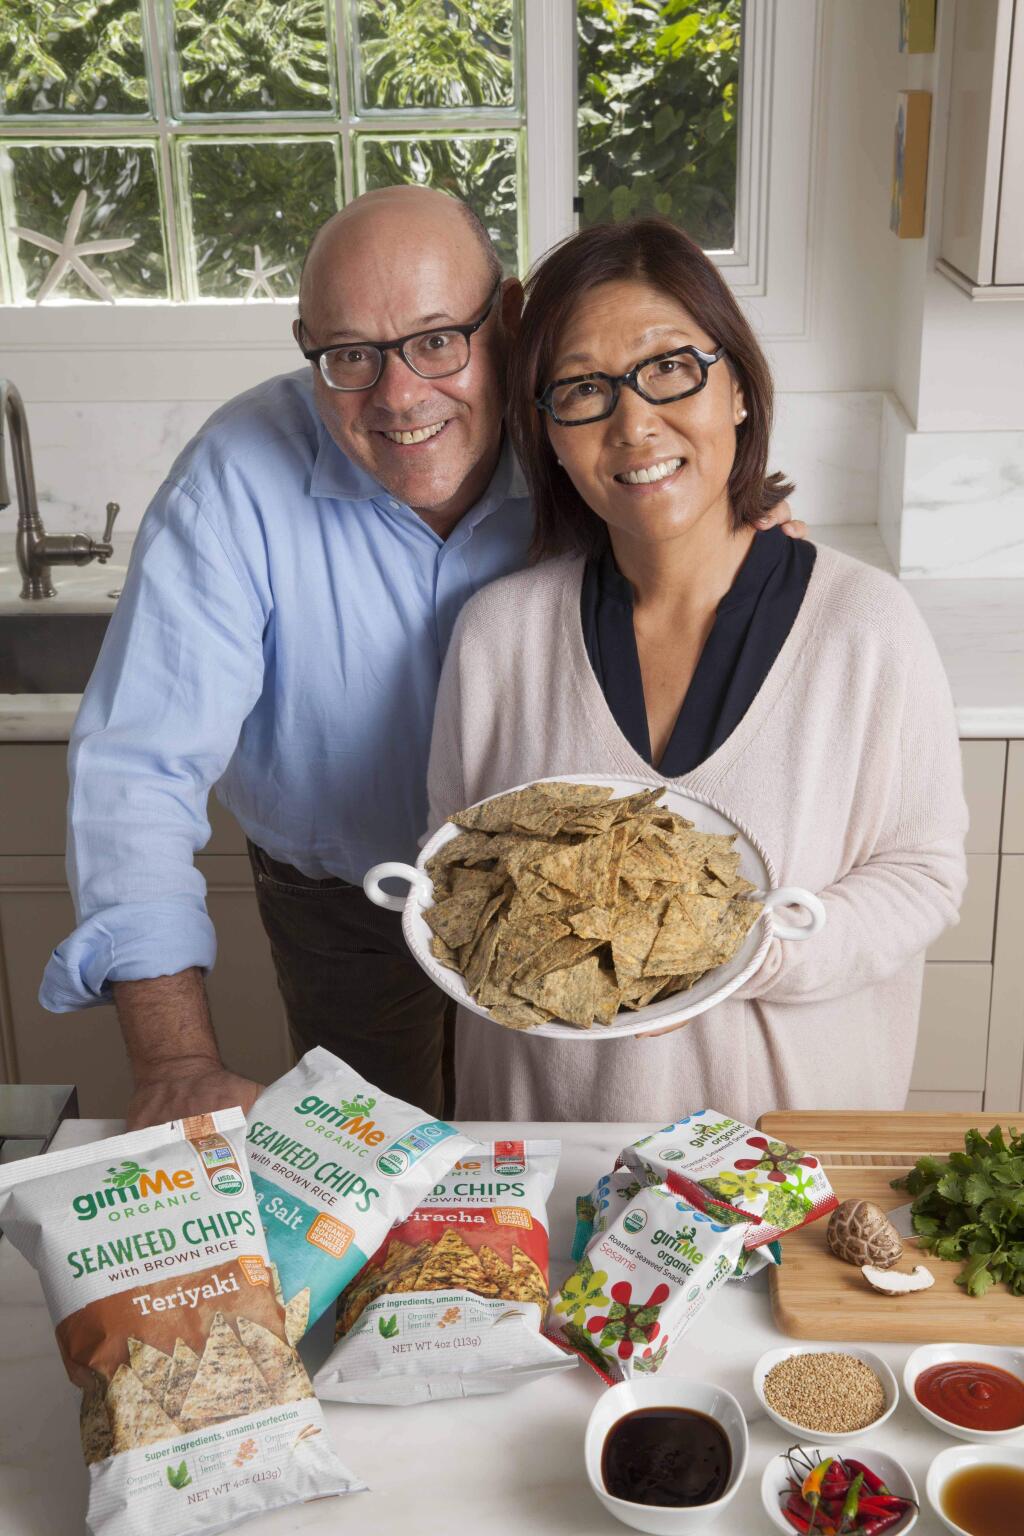 Steve Broad with Annie Chun and their company's gimMe Organic seaweed chips. (LORI EANES FOR GIMME HEALTH FOODS)